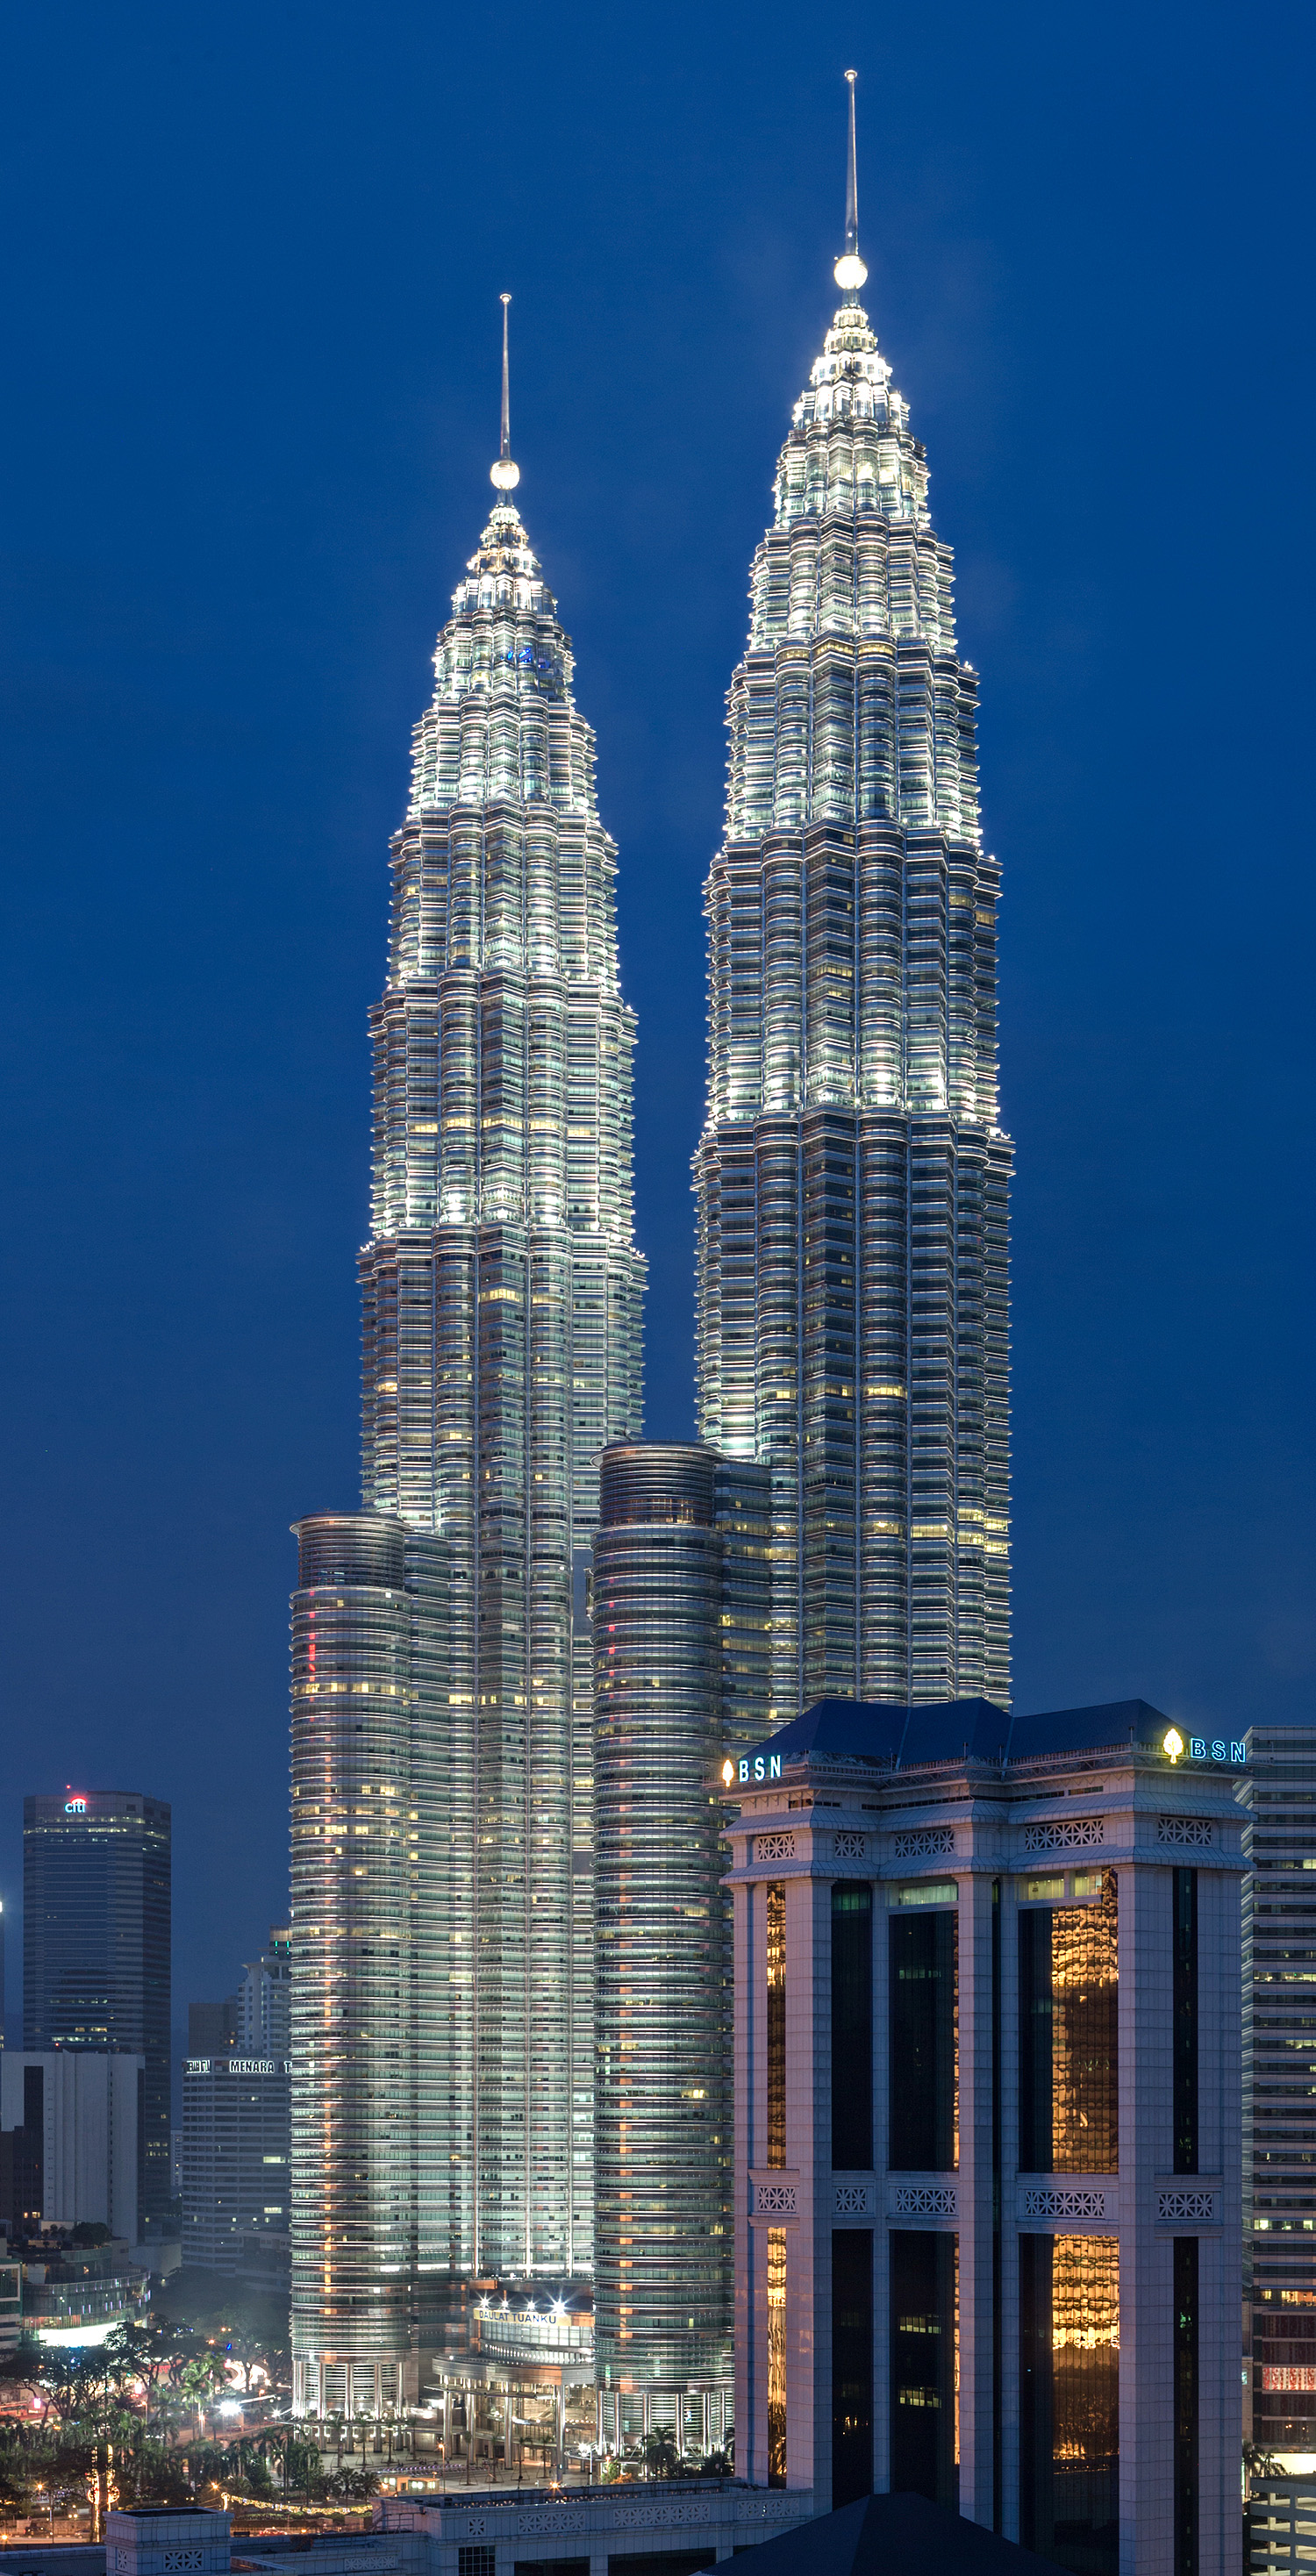 Petronas Twin Tower 2, Kuala Lumpur - View from Renaissance Hotel, Tower 2 is the left tower. © Mathias Beinling